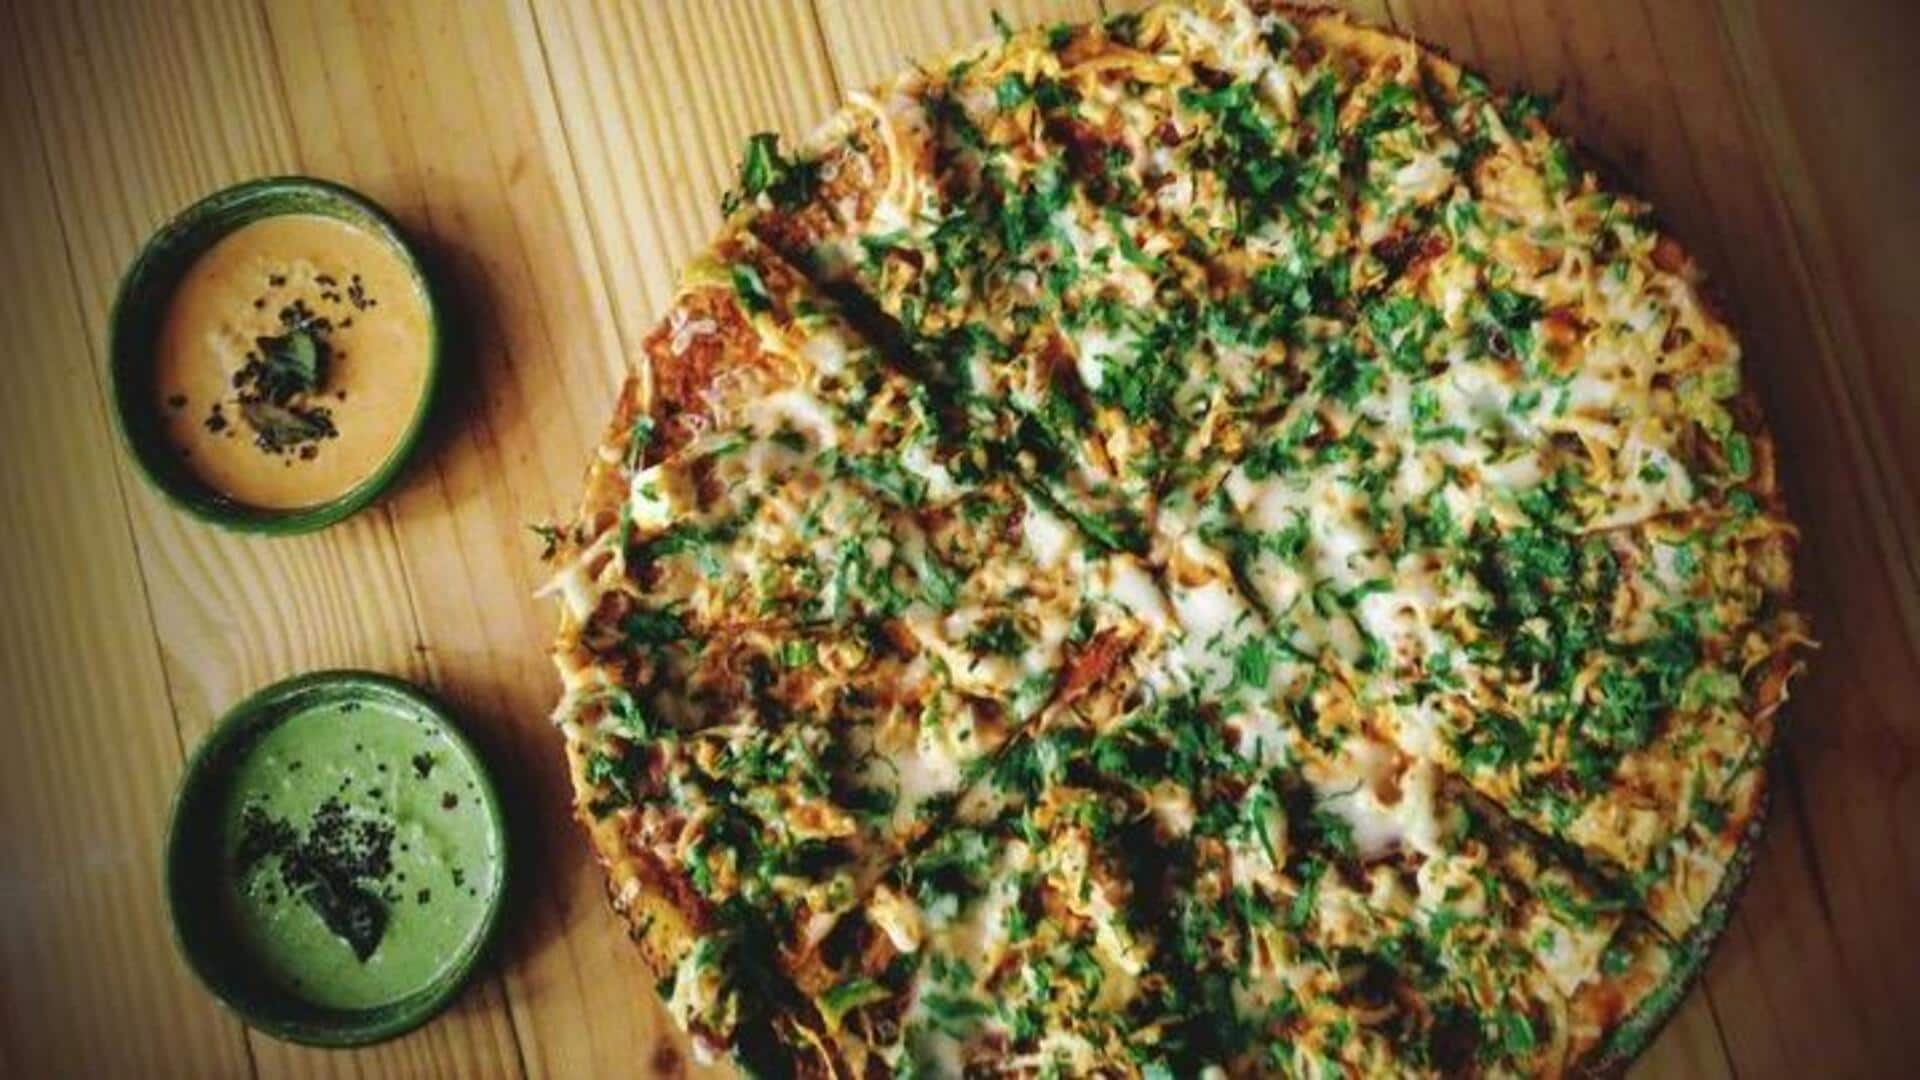 Impress your guests with these delicious vegan cauliflower pizza crusts